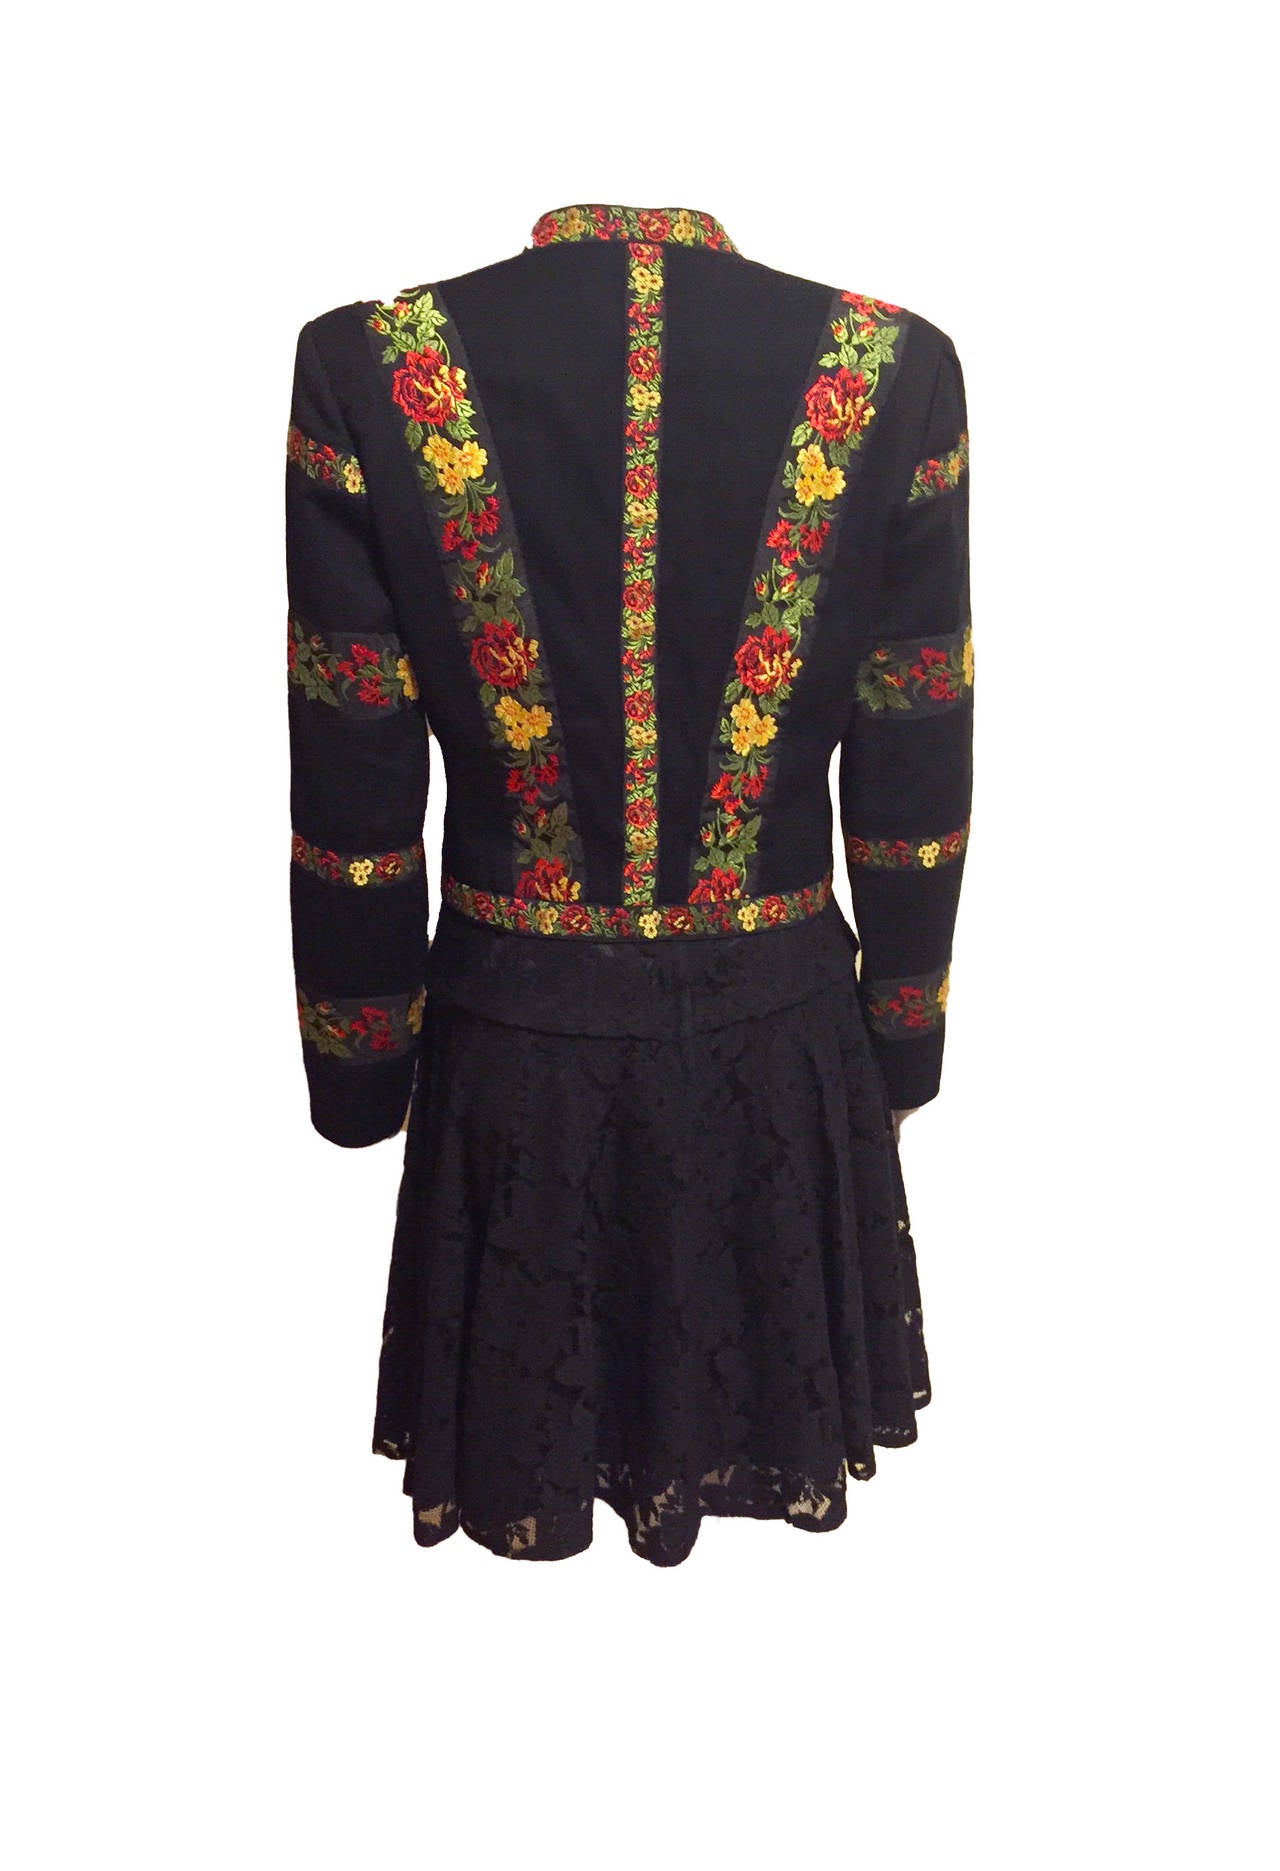 Women's Rare Kenzo Folkloric Inspired Jacket and Lace Skirt For Sale